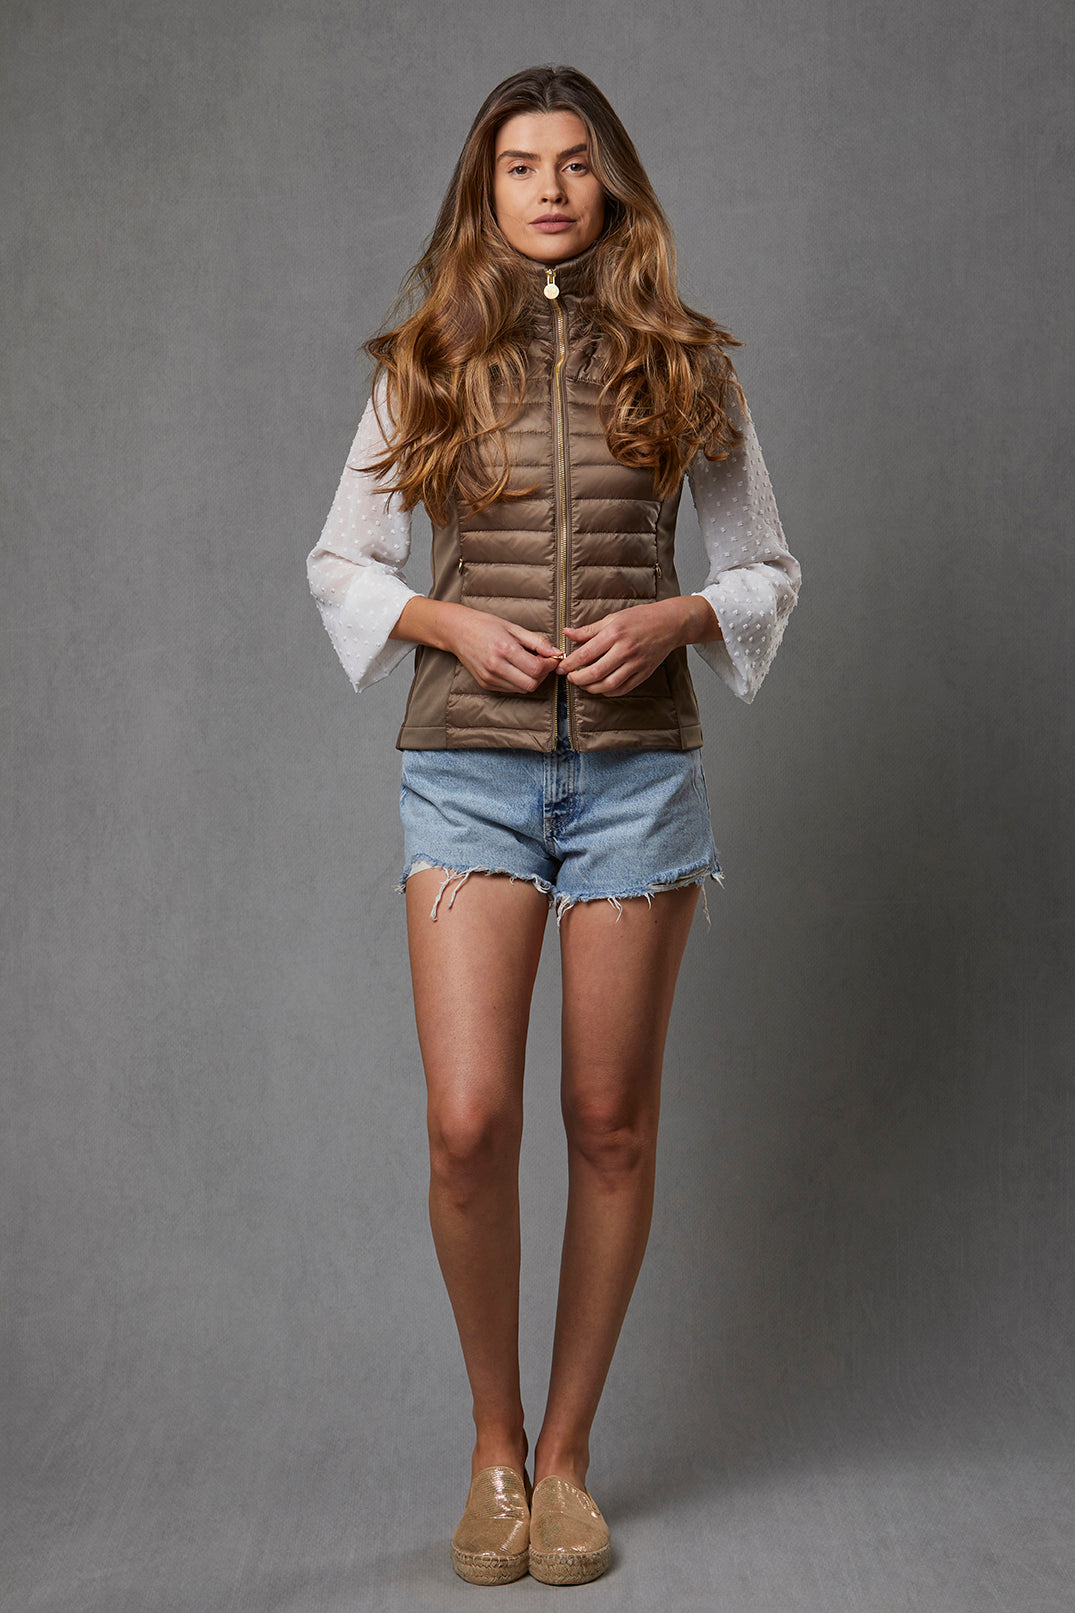 Model is wearing a women's puffer gilet in a khaki, bronze colour. The gilet has a detachable faux fur collar which has been removed to show how the puffer gilet can be worn all year round. It has stretch sides and a branded gold zip.